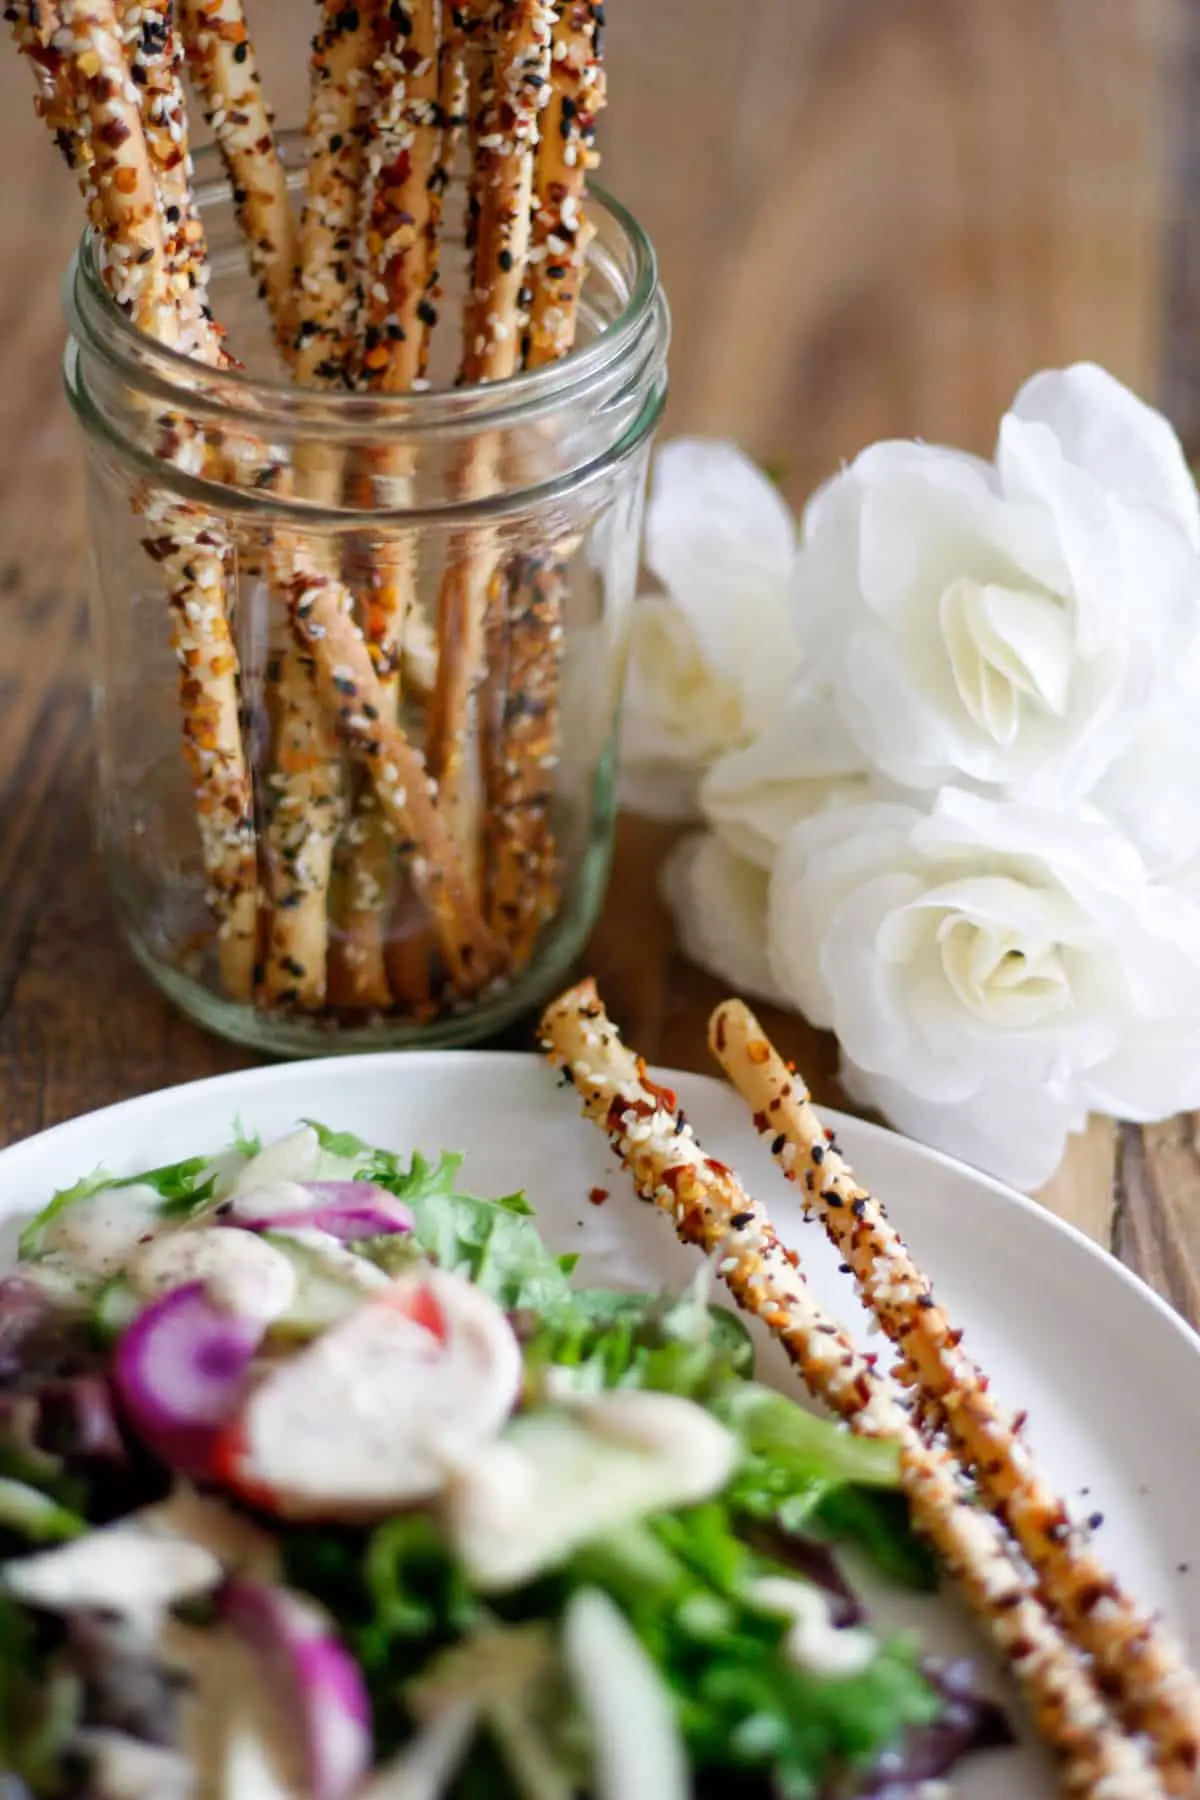 Thin breadsticks coated with everything bagel seasoning, salt and red chili flakes standing in a glass jar with white roses to the right of the jar, and a white plate with a green leaf salad and purple radishes and 2 breadsticks.